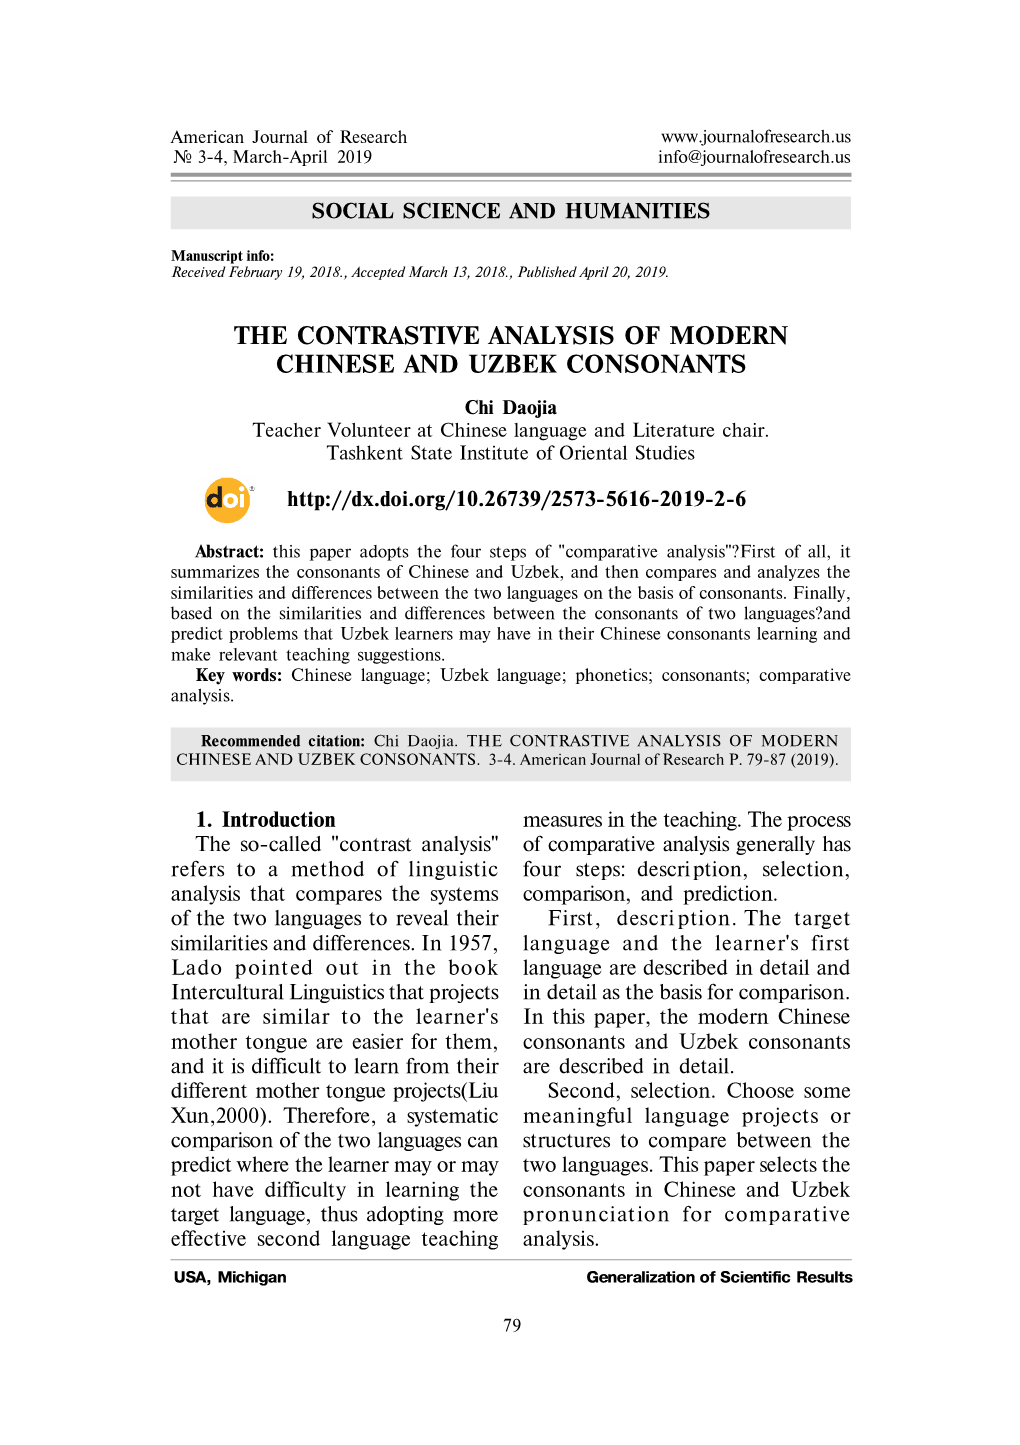 The Contrastive Analysis of Modern Chinese and Uzbek Consonants